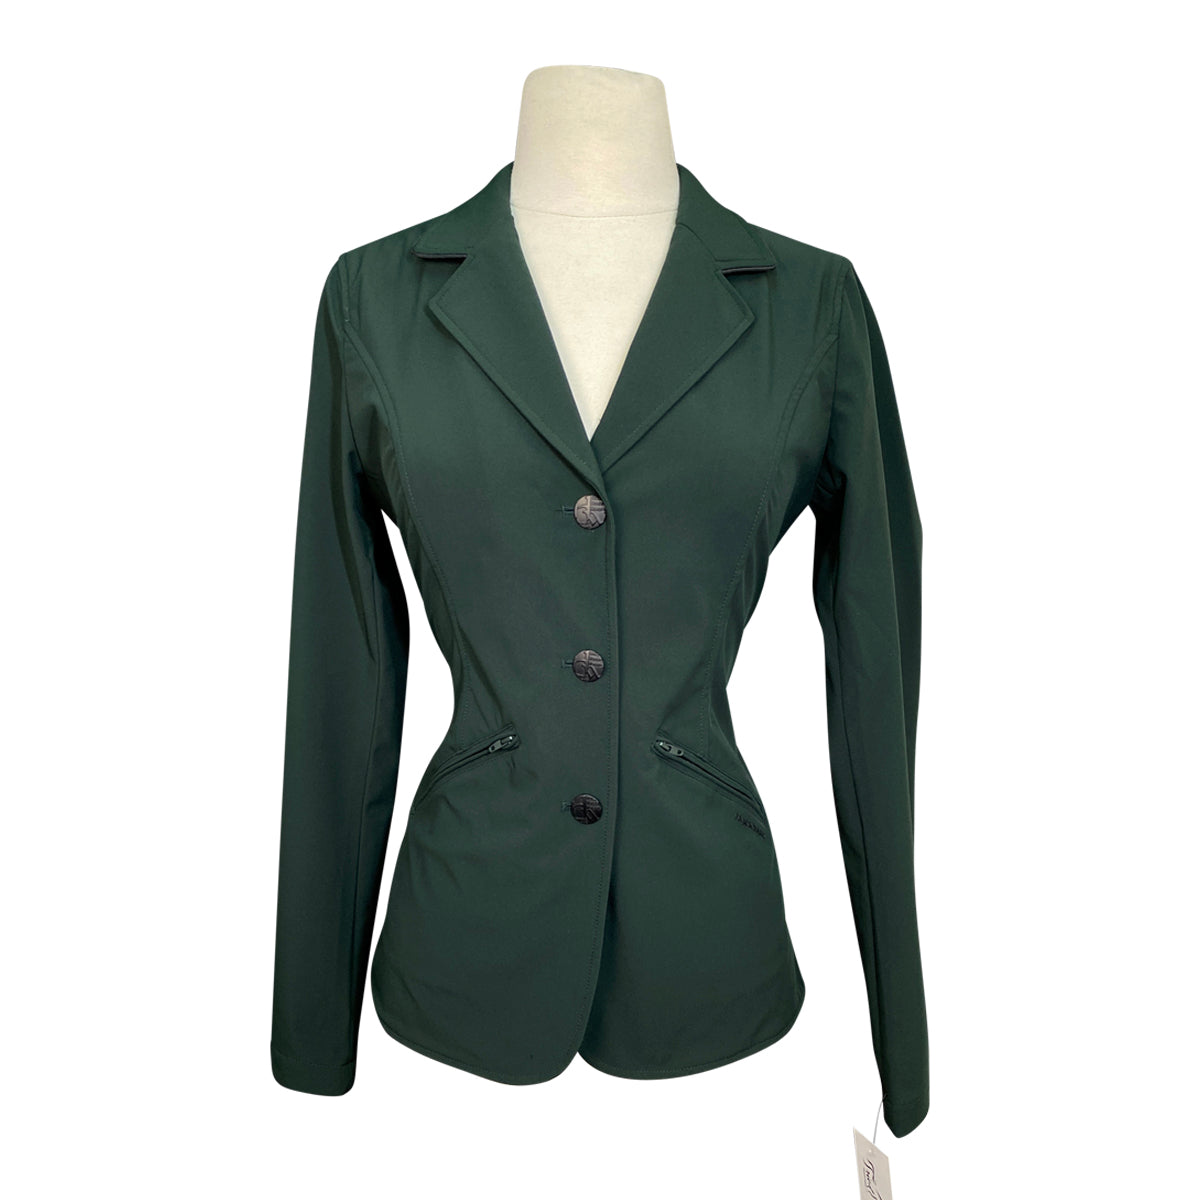 Horseware Competition Coat in Hunter Green